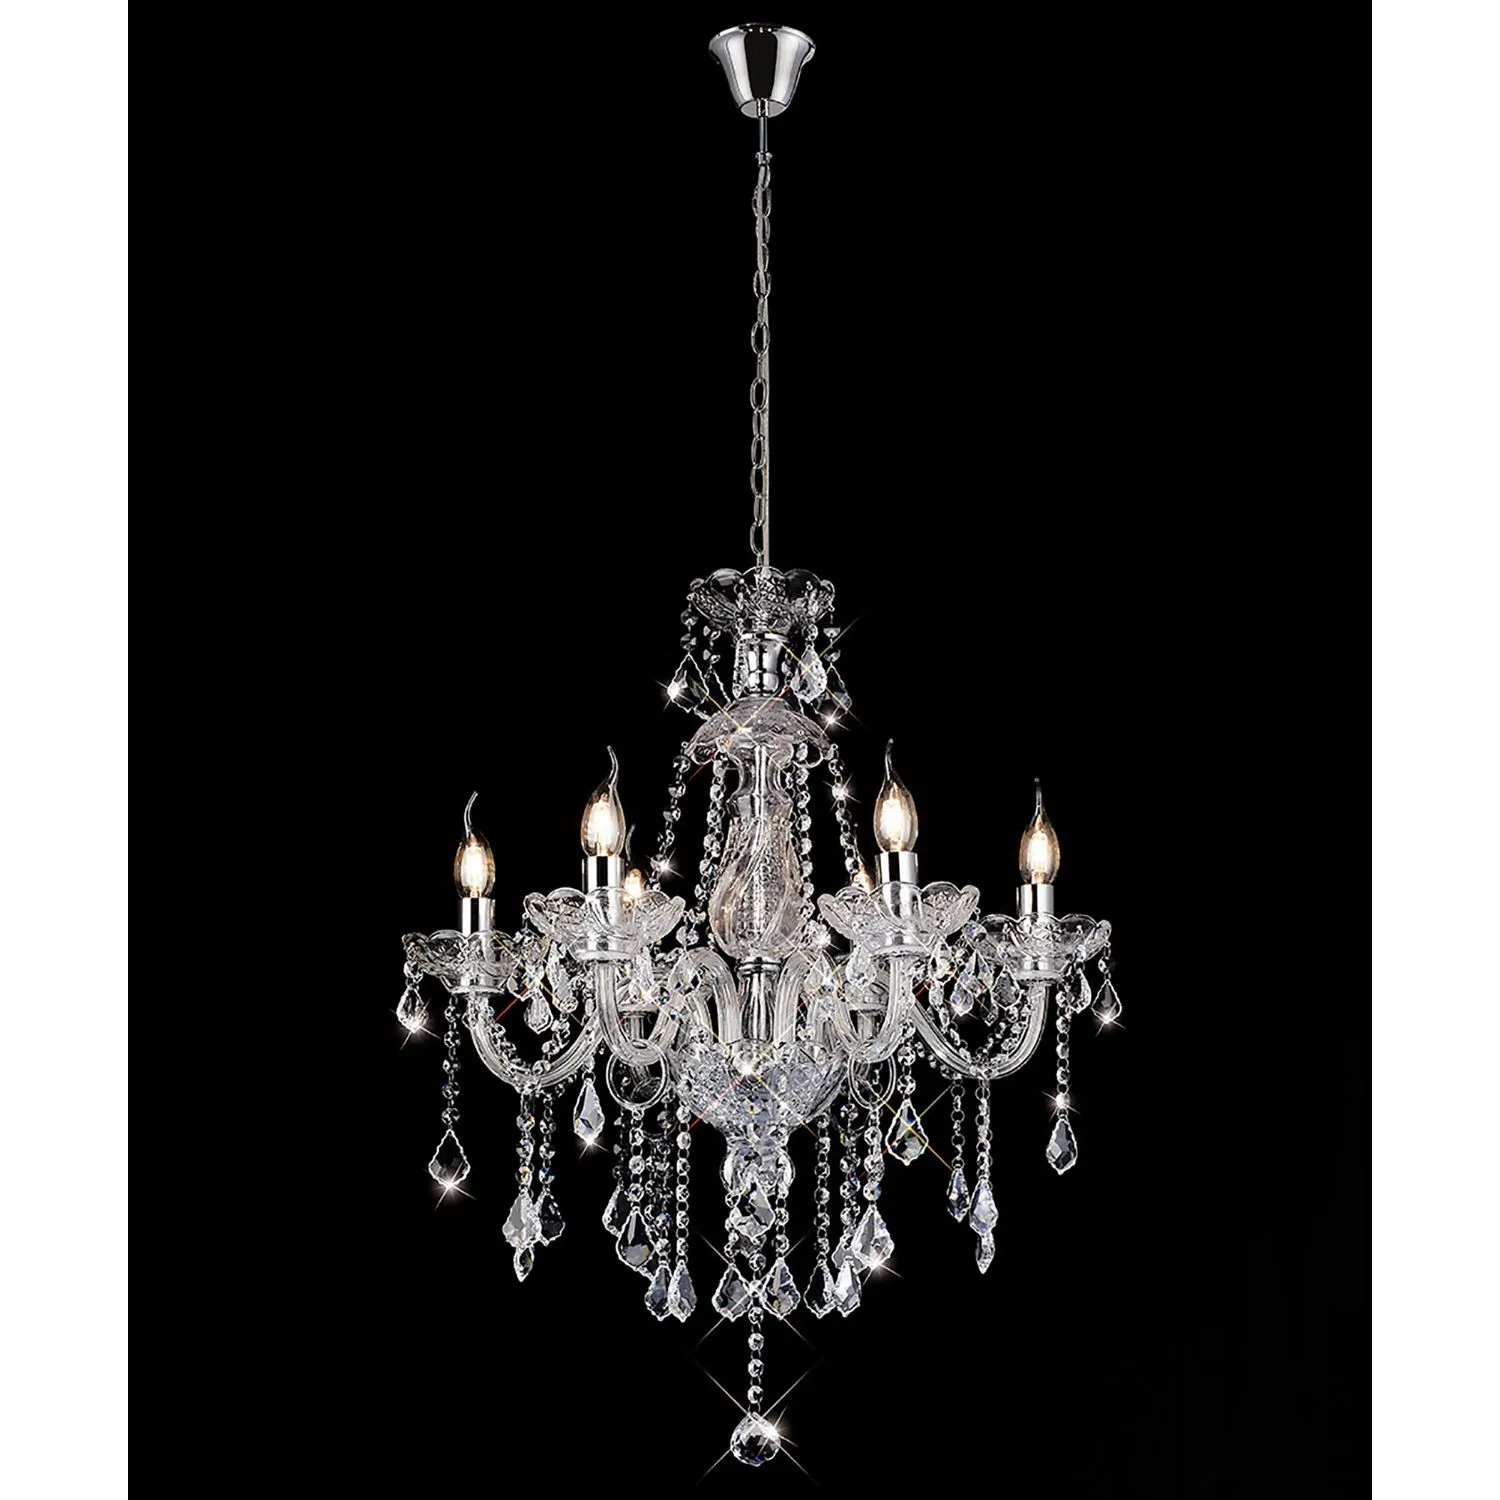 Tiana Pendant 6 Light E14 Polished Chrome Glass Crystal (Item is Not Suitable For Mail Order Sales, COLLECTION ONLY)